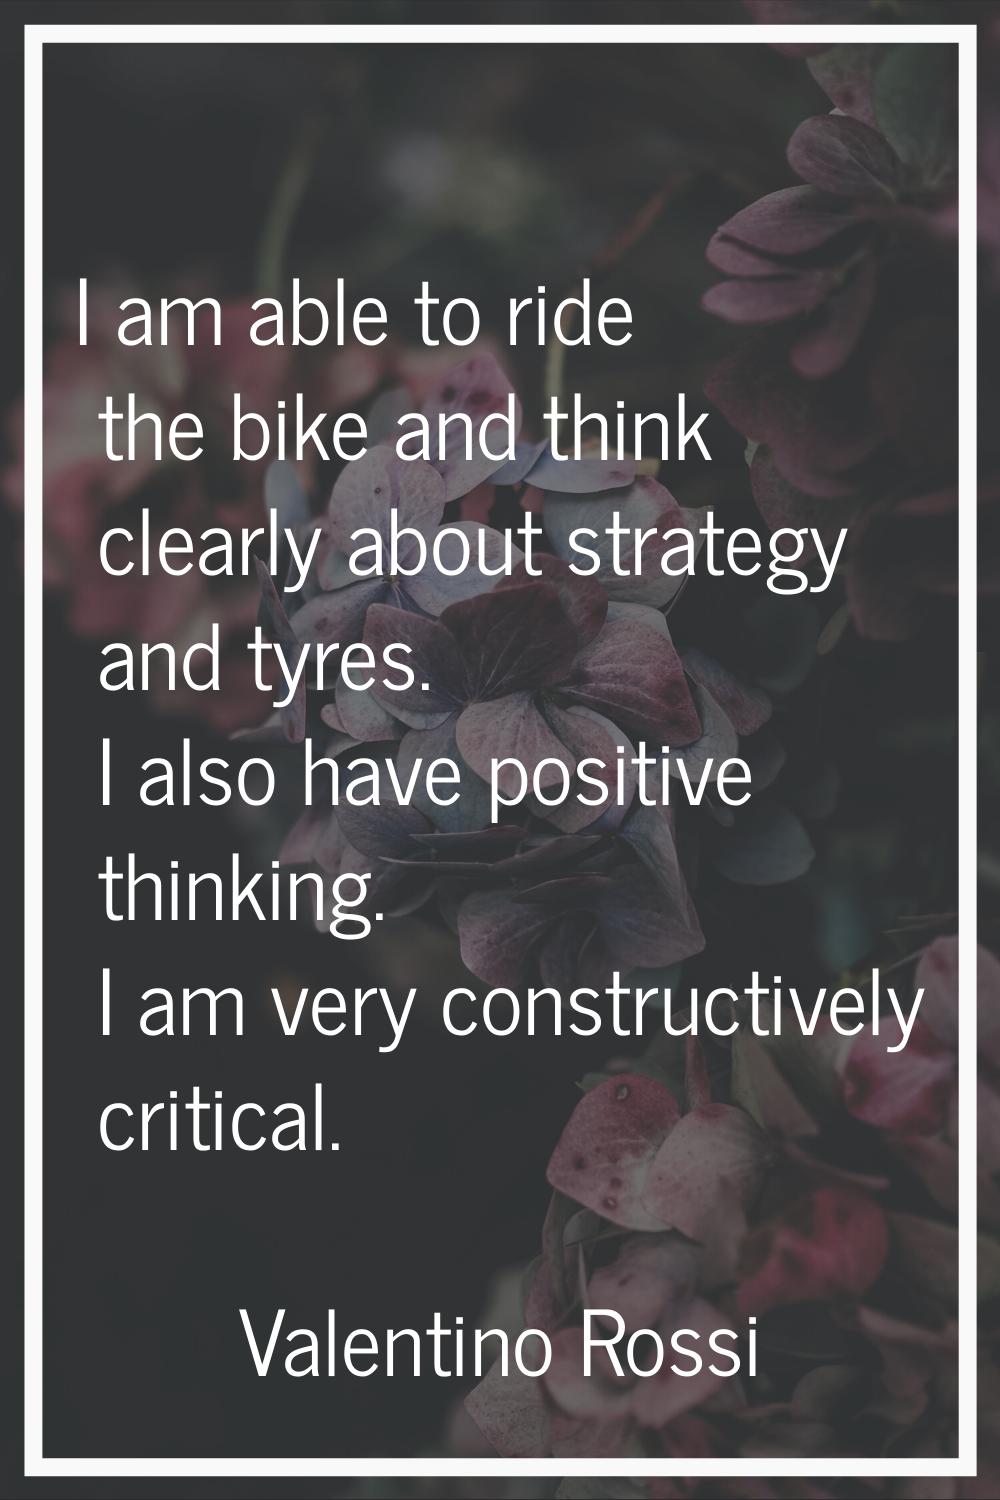 I am able to ride the bike and think clearly about strategy and tyres. I also have positive thinkin